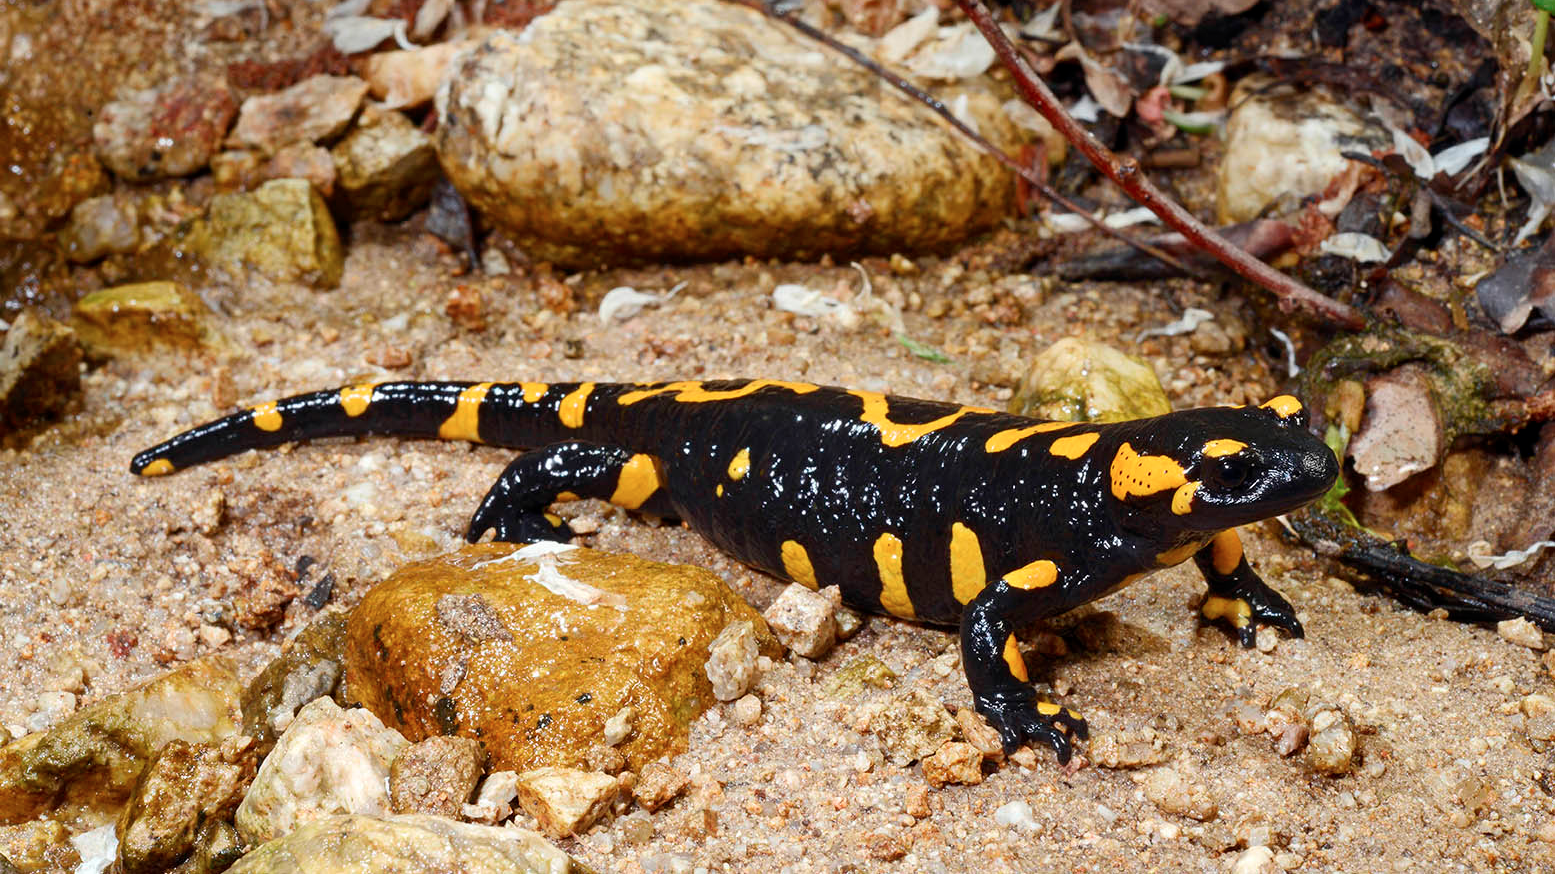 Now Augsburg also supports the more lightweight but colorful fire salamander, which is being increasingly endangered | Benny Trapp